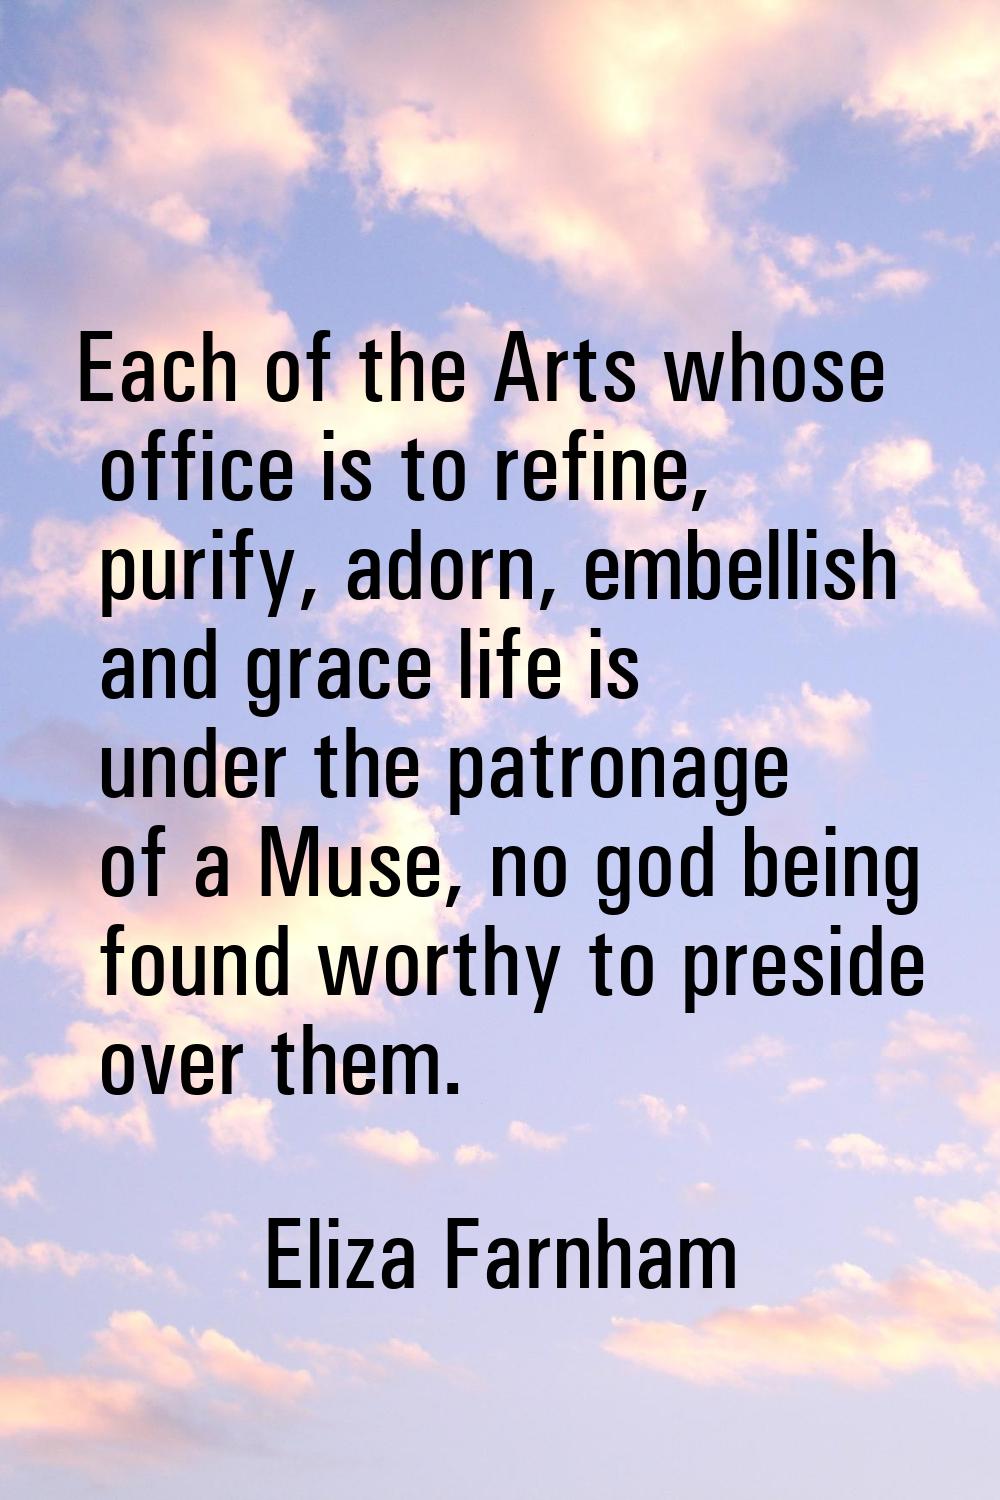 Each of the Arts whose office is to refine, purify, adorn, embellish and grace life is under the pa